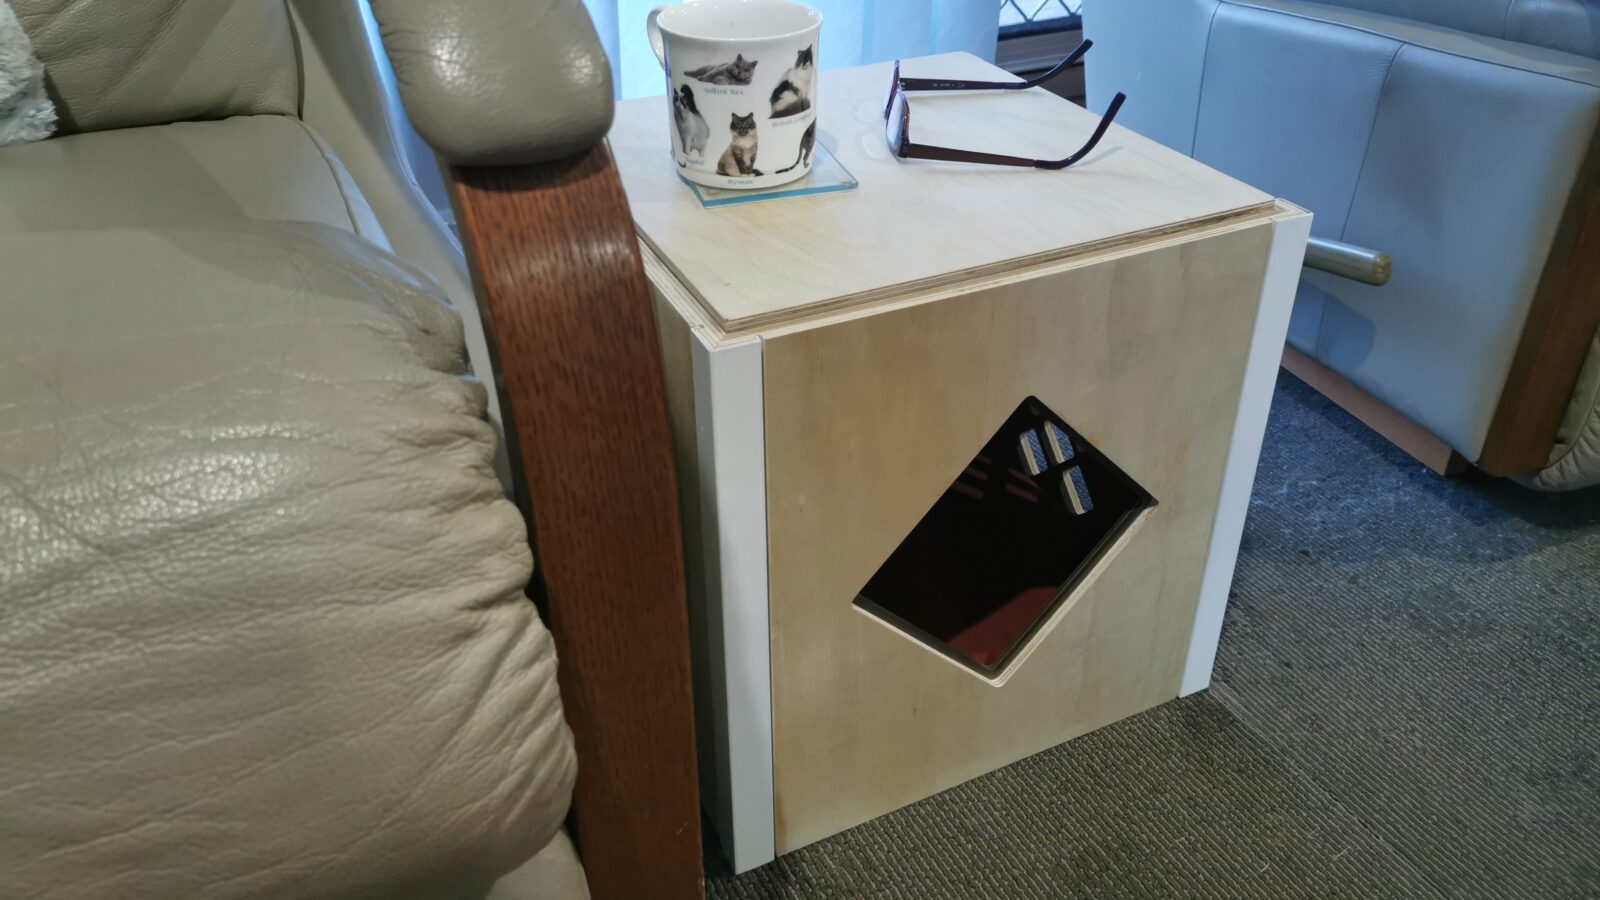 Cubicat in use as a side table.